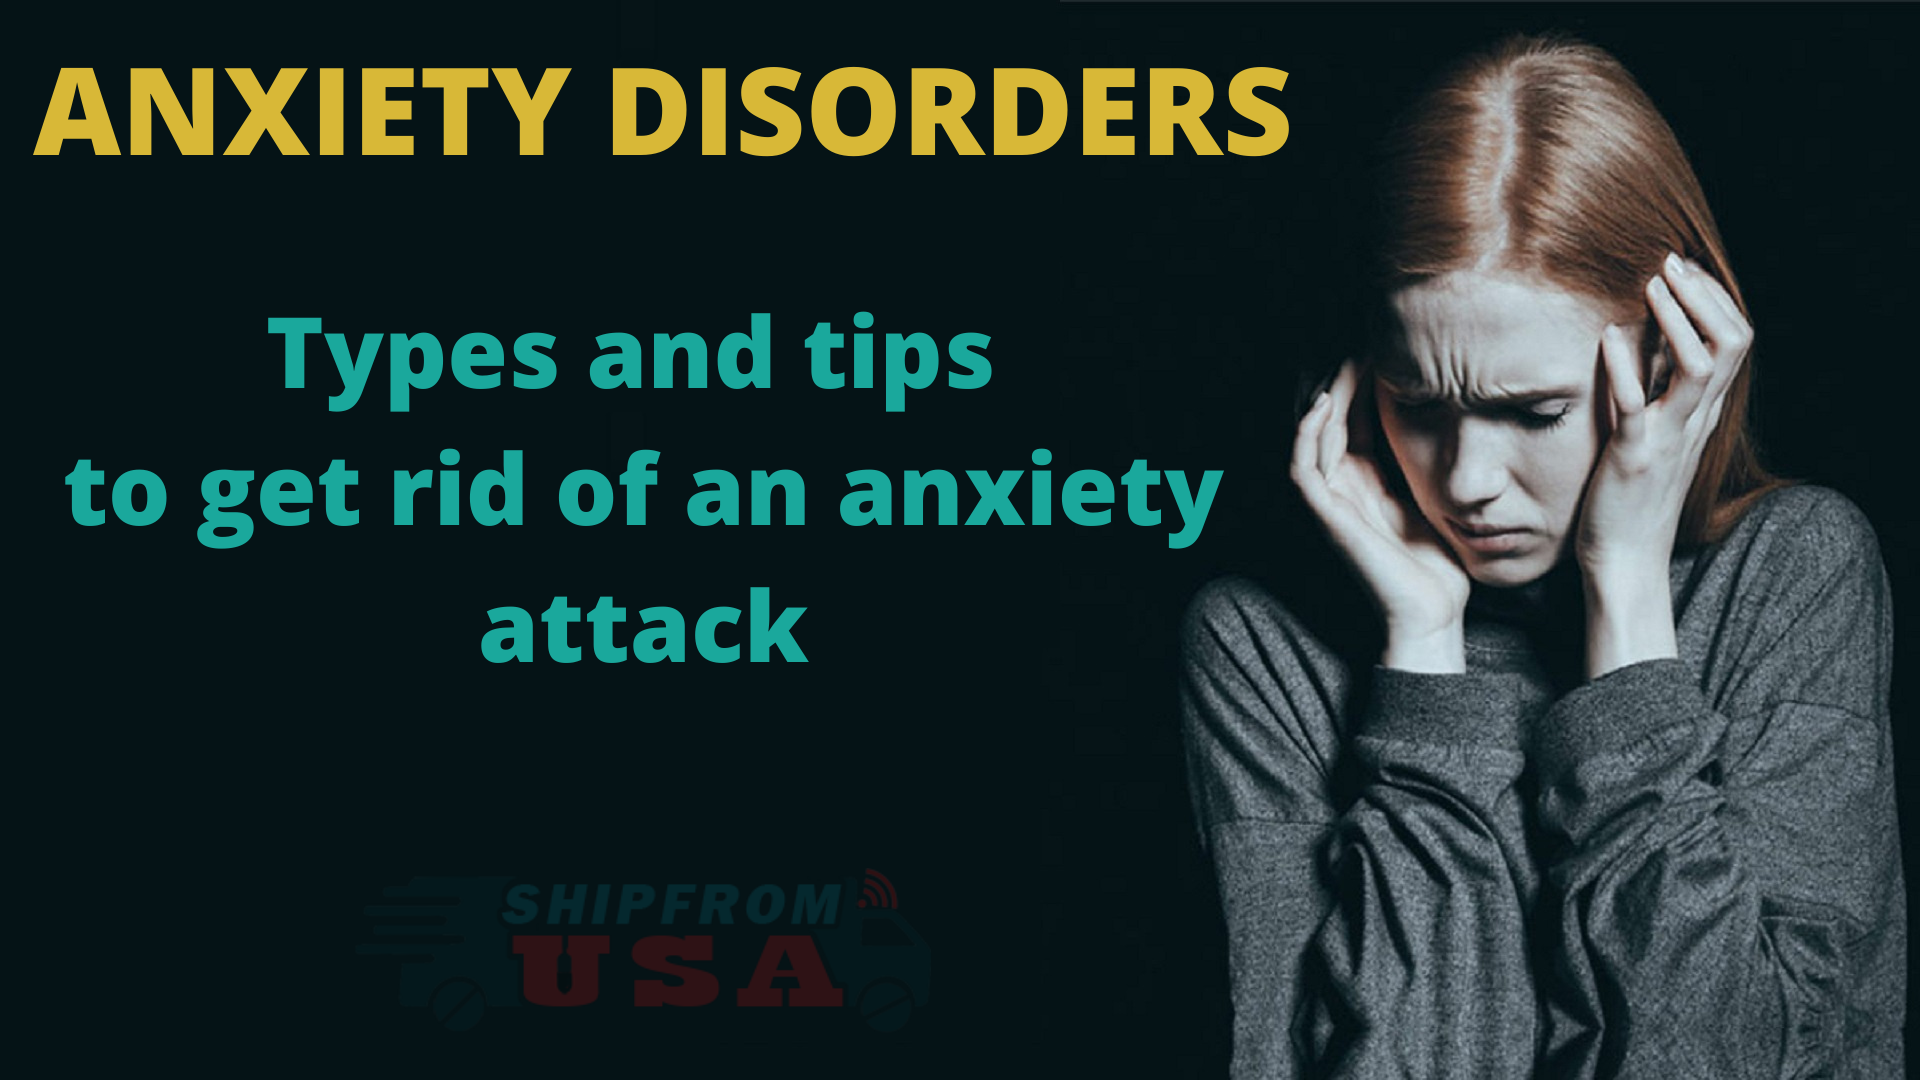 Anxiety disorders Types